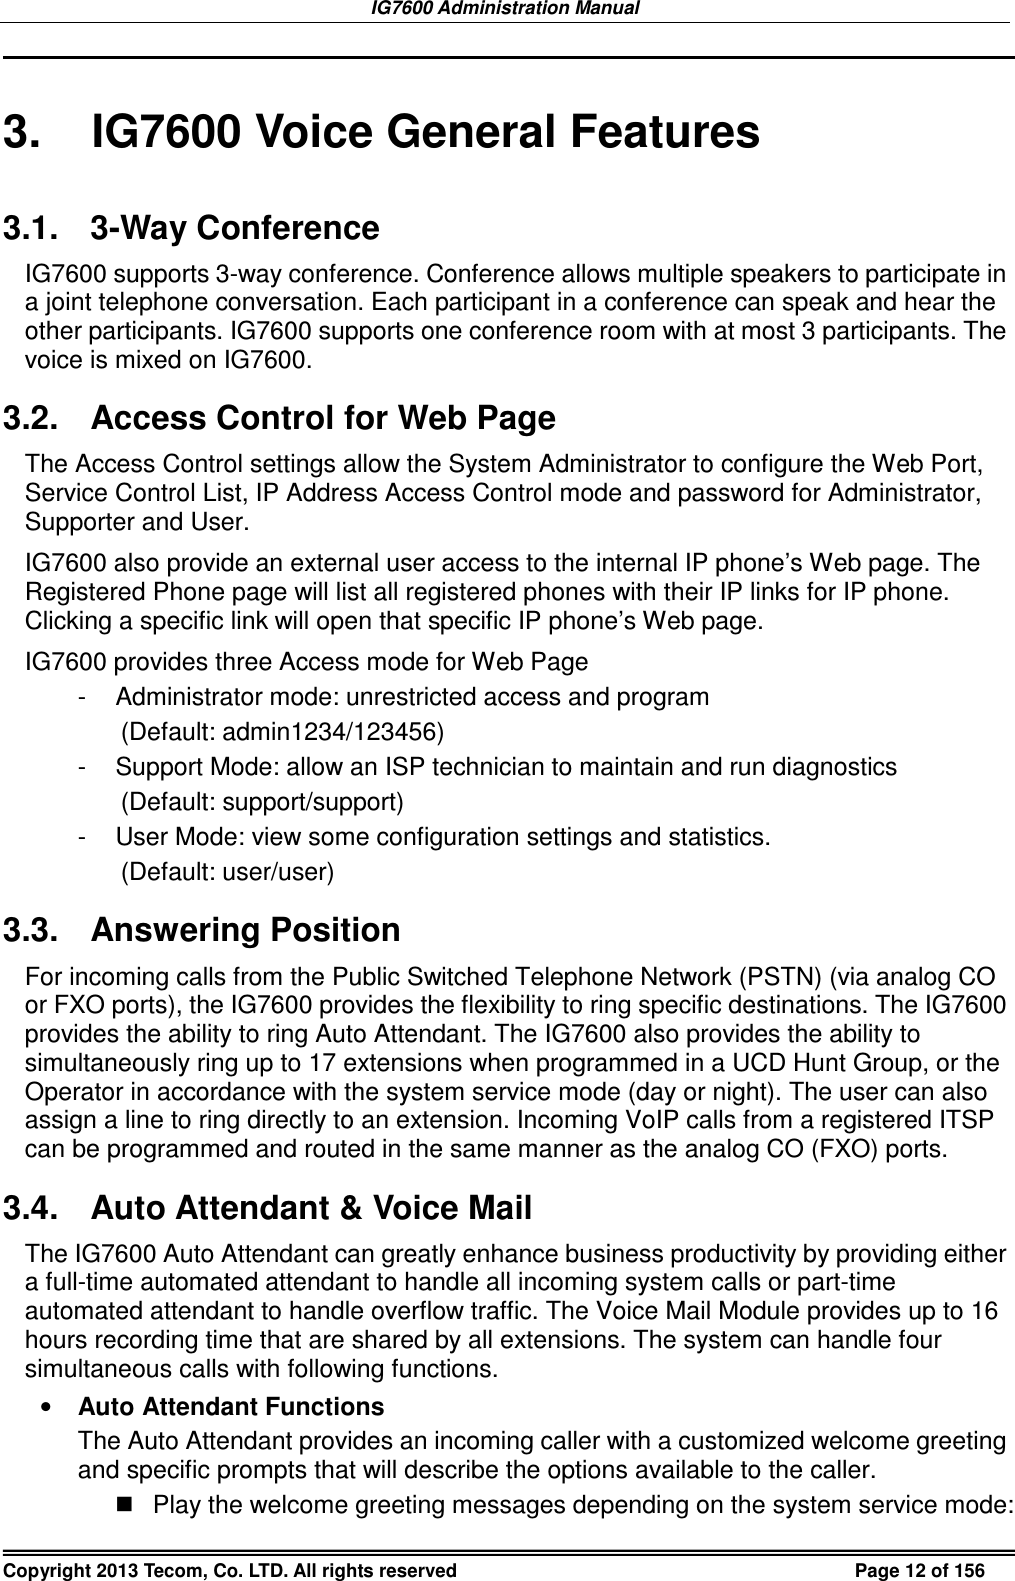 IG7600 Administration Manual Copyright 2013 Tecom, Co. LTD. All rights reserved  Page 12 of 156  3.  IG7600 Voice General Features 3.1.  3-Way Conference IG7600 supports 3-way conference. Conference allows multiple speakers to participate in a joint telephone conversation. Each participant in a conference can speak and hear the other participants. IG7600 supports one conference room with at most 3 participants. The voice is mixed on IG7600. 3.2.  Access Control for Web Page The Access Control settings allow the System Administrator to configure the Web Port, Service Control List, IP Address Access Control mode and password for Administrator, Supporter and User. IG7600 also provide an external user access to the internal IP phone’s Web page. The Registered Phone page will list all registered phones with their IP links for IP phone. Clicking a specific link will open that specific IP phone’s Web page. IG7600 provides three Access mode for Web Page -  Administrator mode: unrestricted access and program   (Default: admin1234/123456) -  Support Mode: allow an ISP technician to maintain and run diagnostics (Default: support/support) -  User Mode: view some configuration settings and statistics. (Default: user/user) 3.3.  Answering Position For incoming calls from the Public Switched Telephone Network (PSTN) (via analog CO or FXO ports), the IG7600 provides the flexibility to ring specific destinations. The IG7600 provides the ability to ring Auto Attendant. The IG7600 also provides the ability to simultaneously ring up to 17 extensions when programmed in a UCD Hunt Group, or the Operator in accordance with the system service mode (day or night). The user can also assign a line to ring directly to an extension. Incoming VoIP calls from a registered ITSP can be programmed and routed in the same manner as the analog CO (FXO) ports. 3.4.  Auto Attendant &amp; Voice Mail The IG7600 Auto Attendant can greatly enhance business productivity by providing either a full-time automated attendant to handle all incoming system calls or part-time automated attendant to handle overflow traffic. The Voice Mail Module provides up to 16 hours recording time that are shared by all extensions. The system can handle four simultaneous calls with following functions. • Auto Attendant Functions The Auto Attendant provides an incoming caller with a customized welcome greeting and specific prompts that will describe the options available to the caller.   Play the welcome greeting messages depending on the system service mode: 